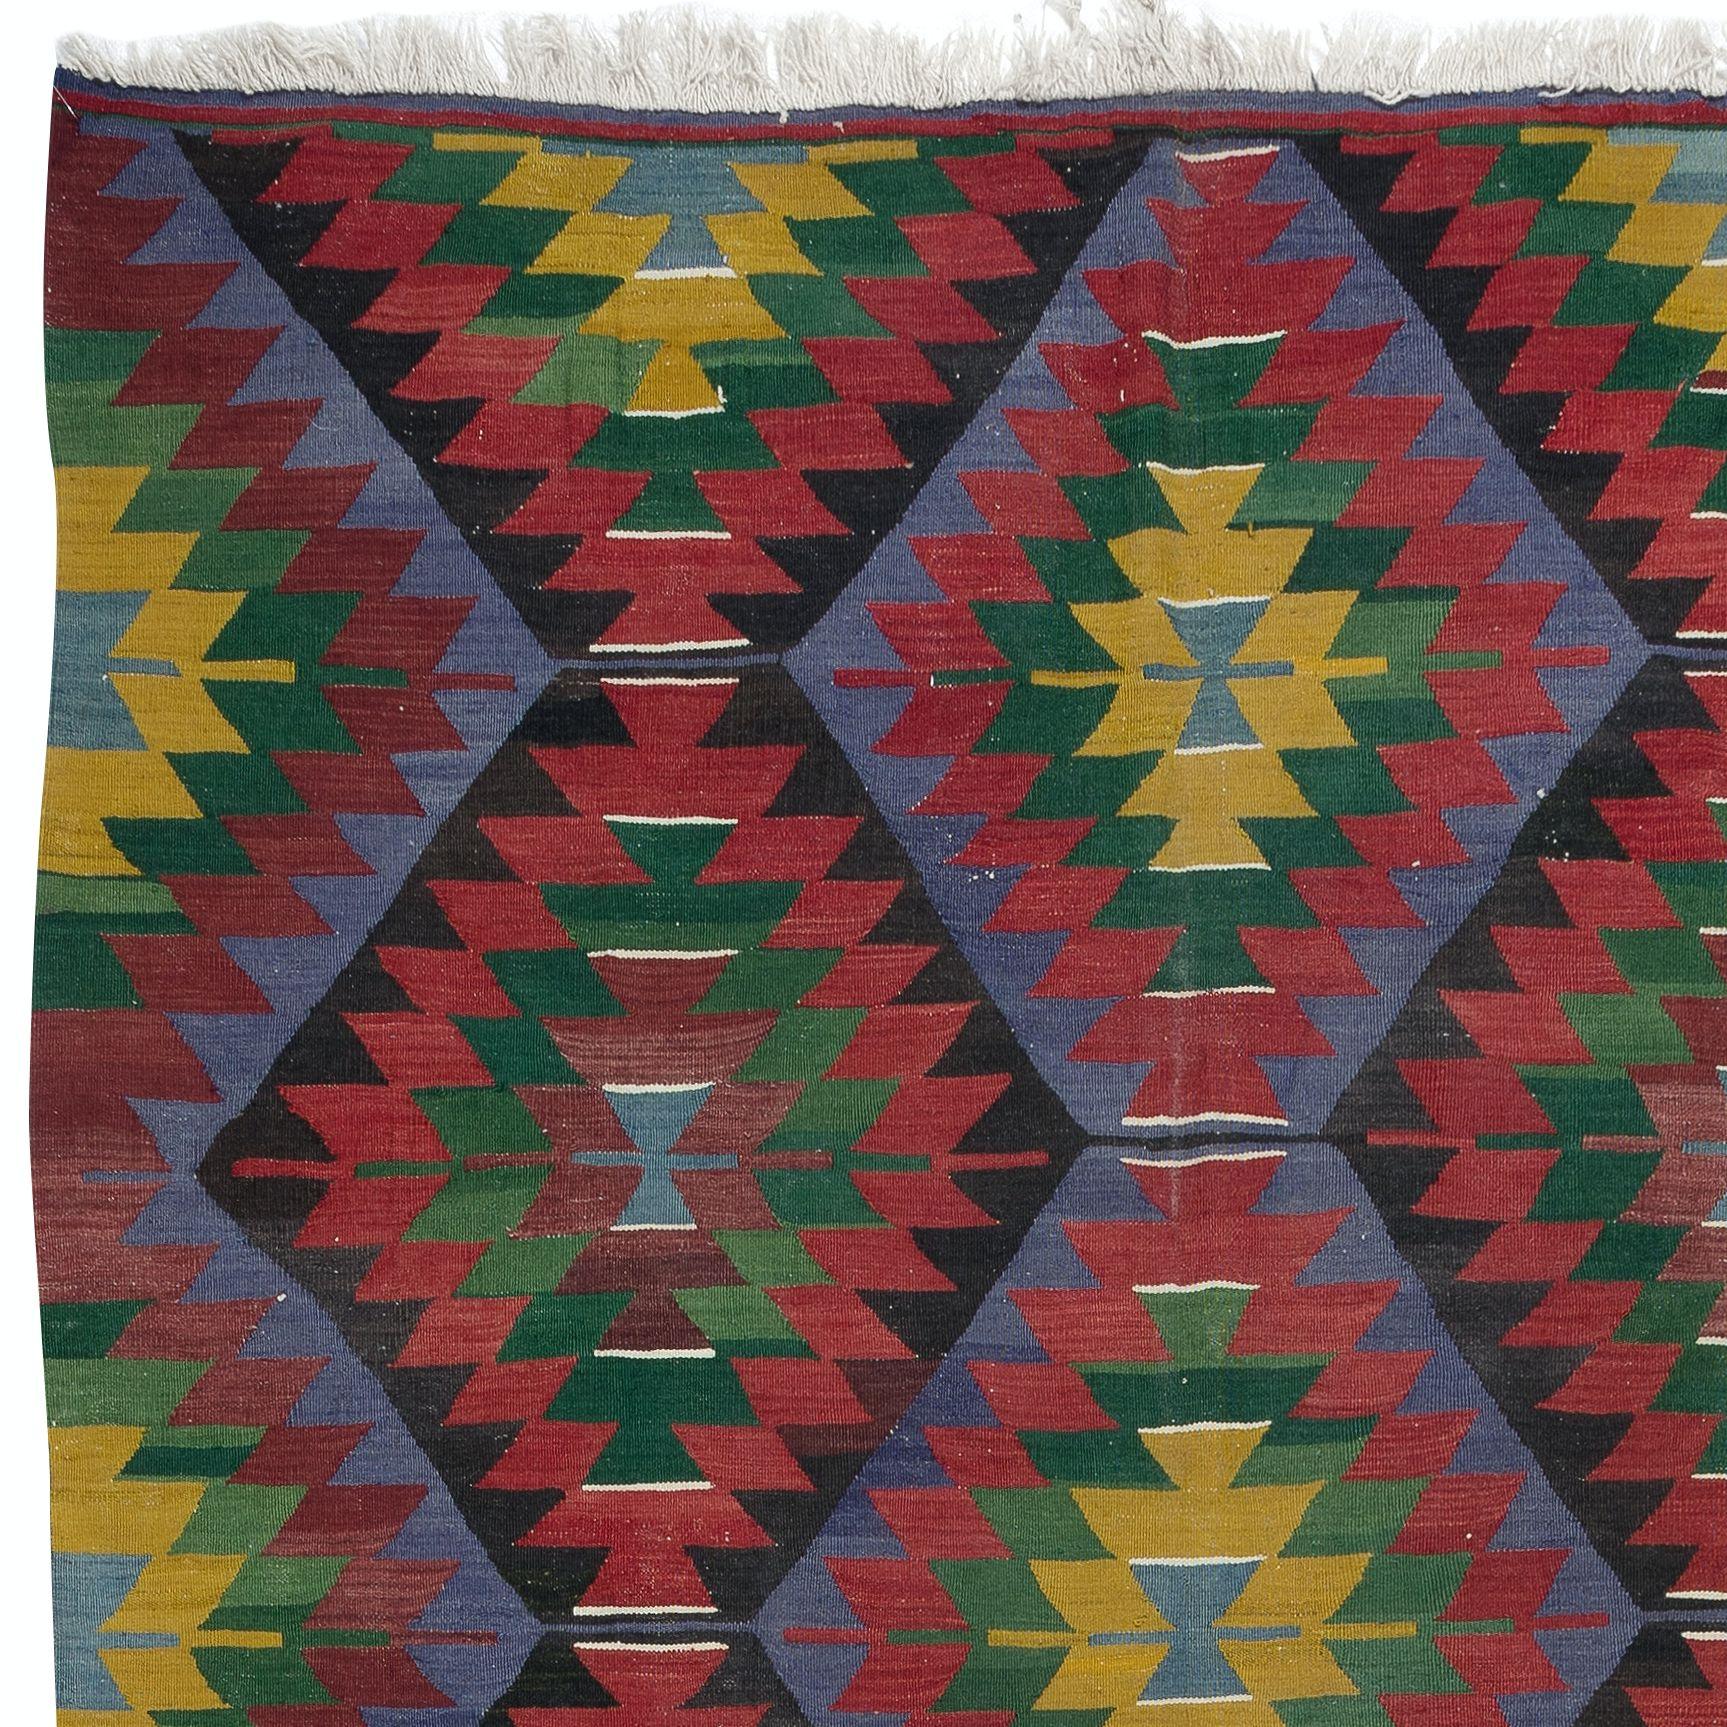 Hand-Woven 6x10.5 Ft Vintage Handwoven Turkish Kilim 'Flat Weave' with Geometric Patterns For Sale